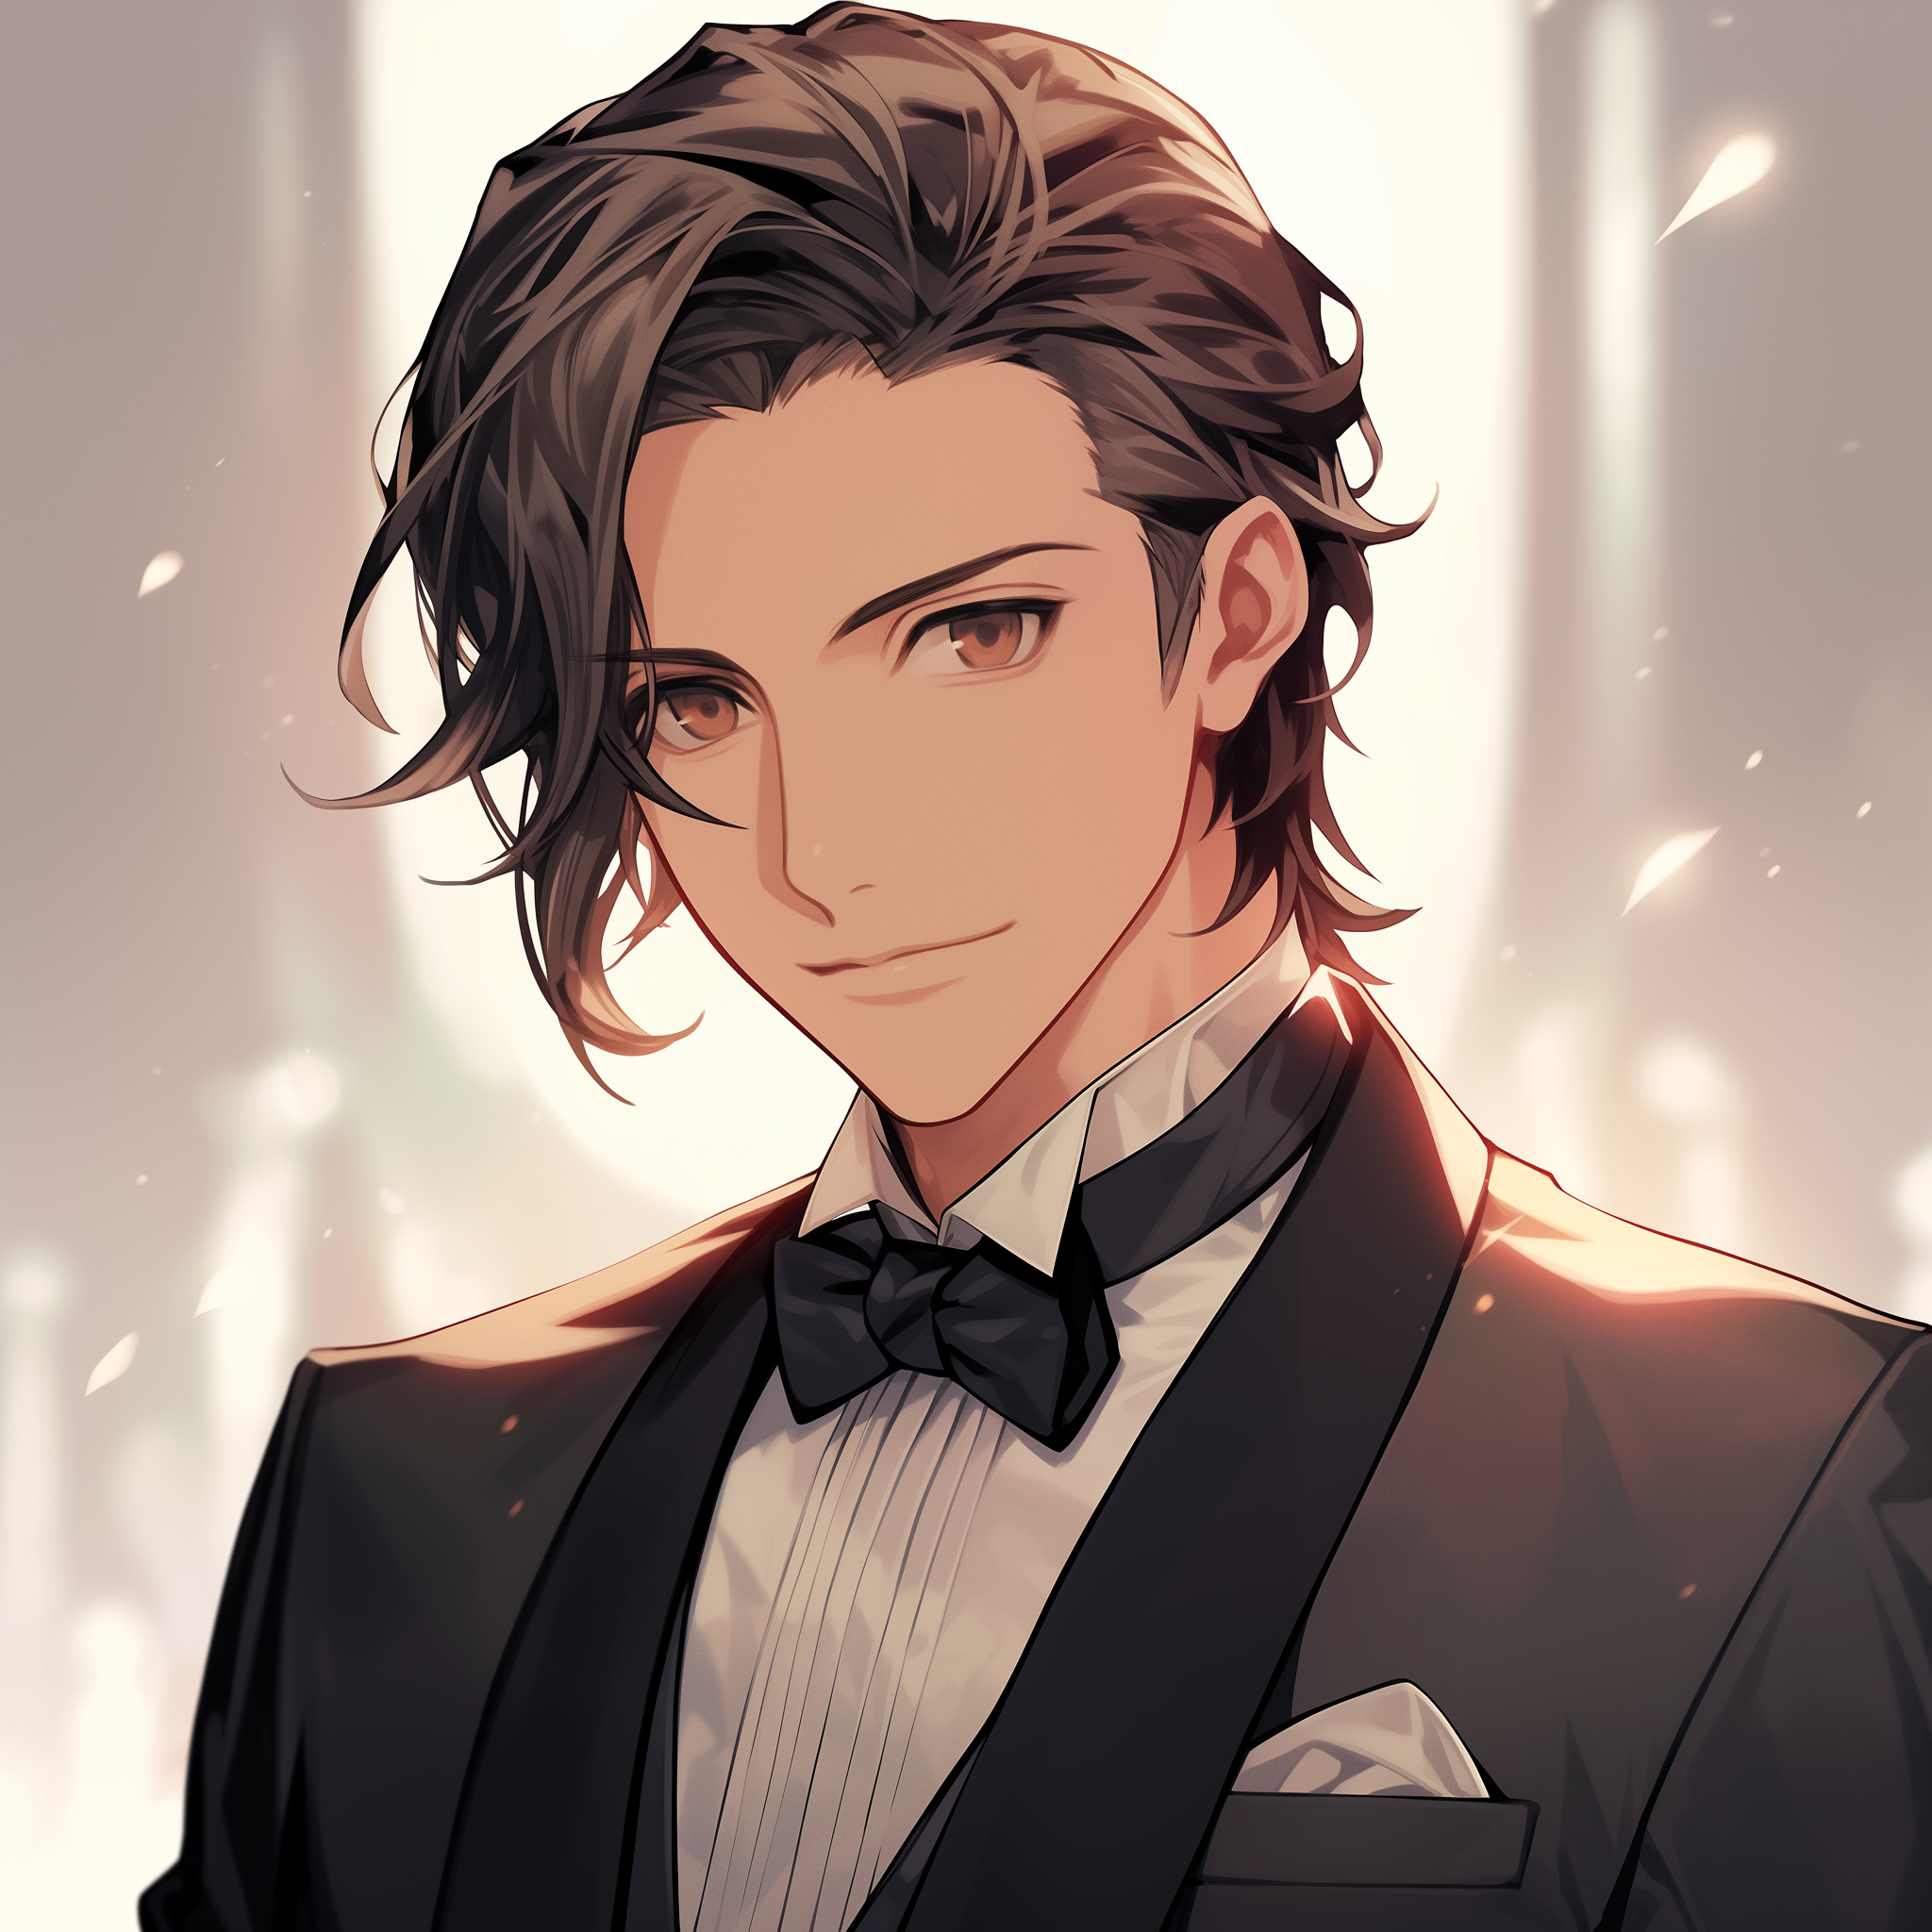 Anime man in tuxedo avatar with elegant hairstyle and bow tie.